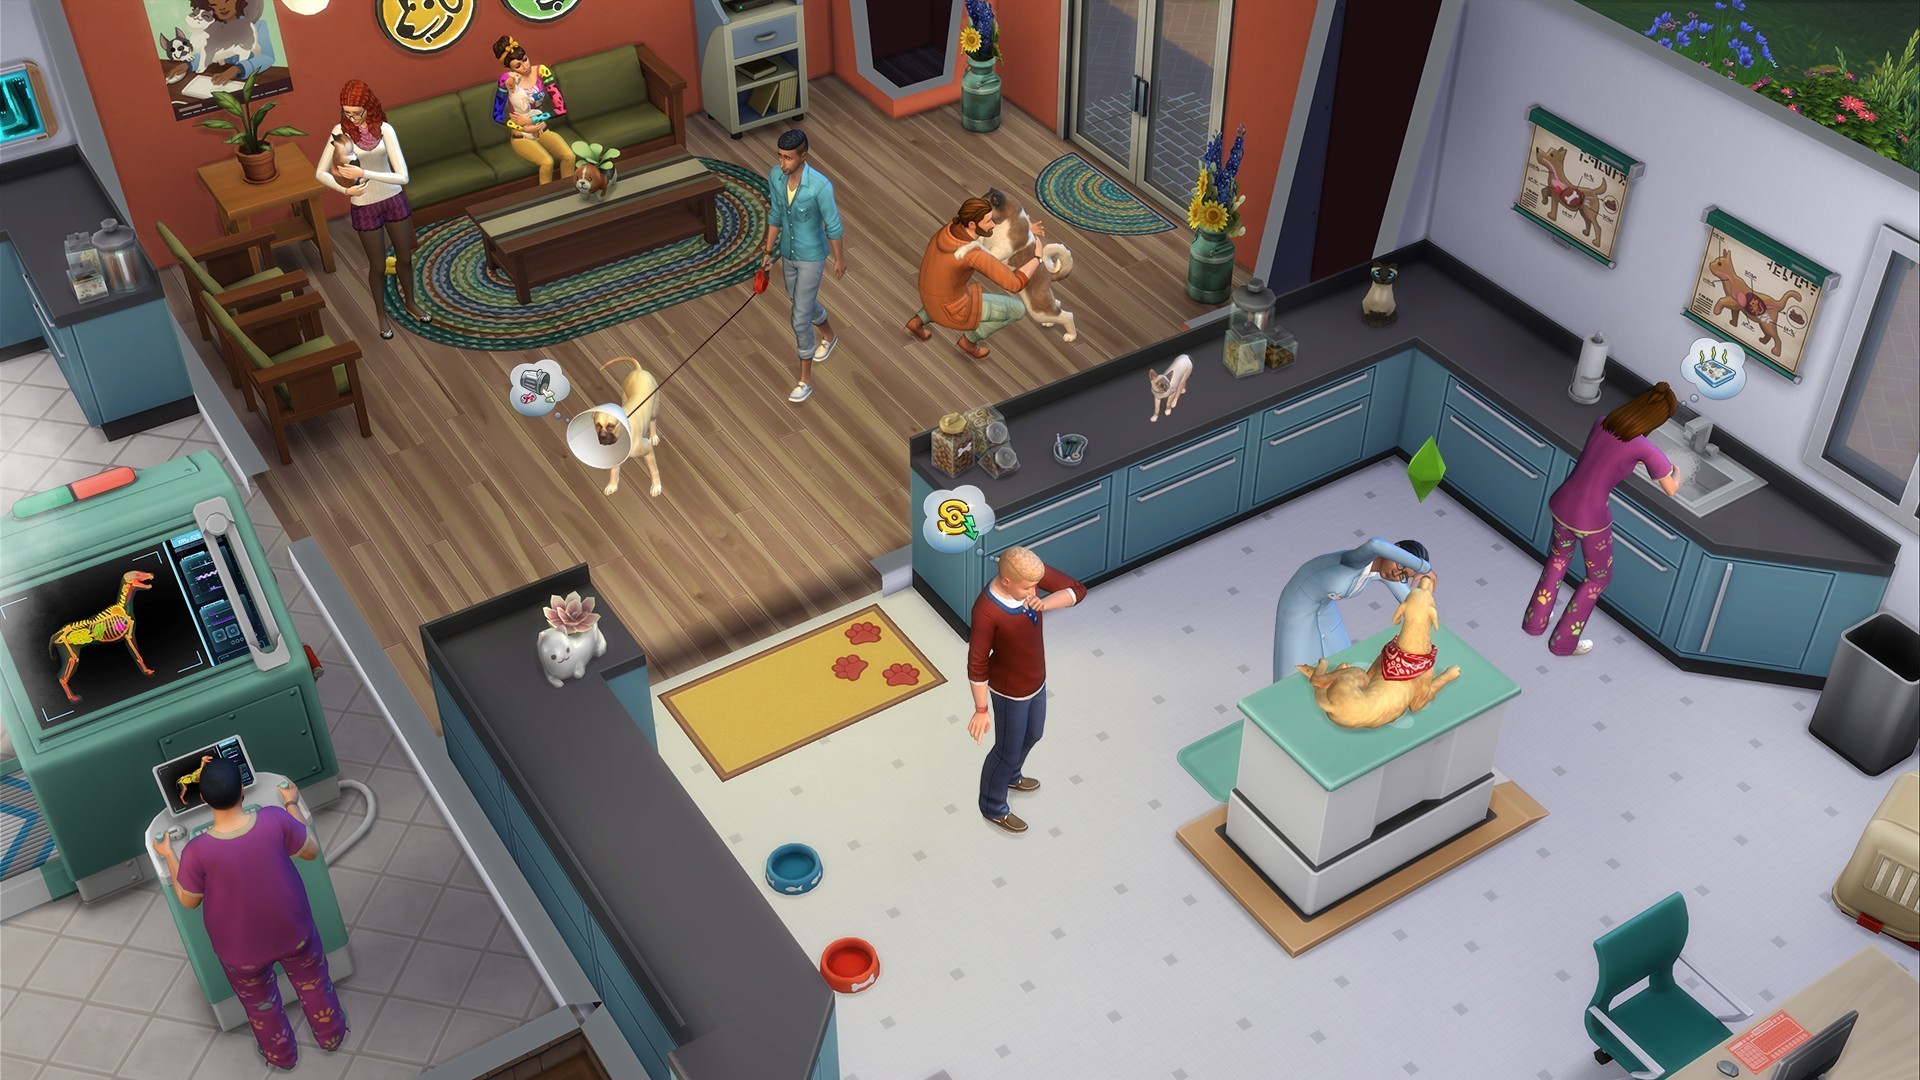 ps4 sims 4 cats and dogs